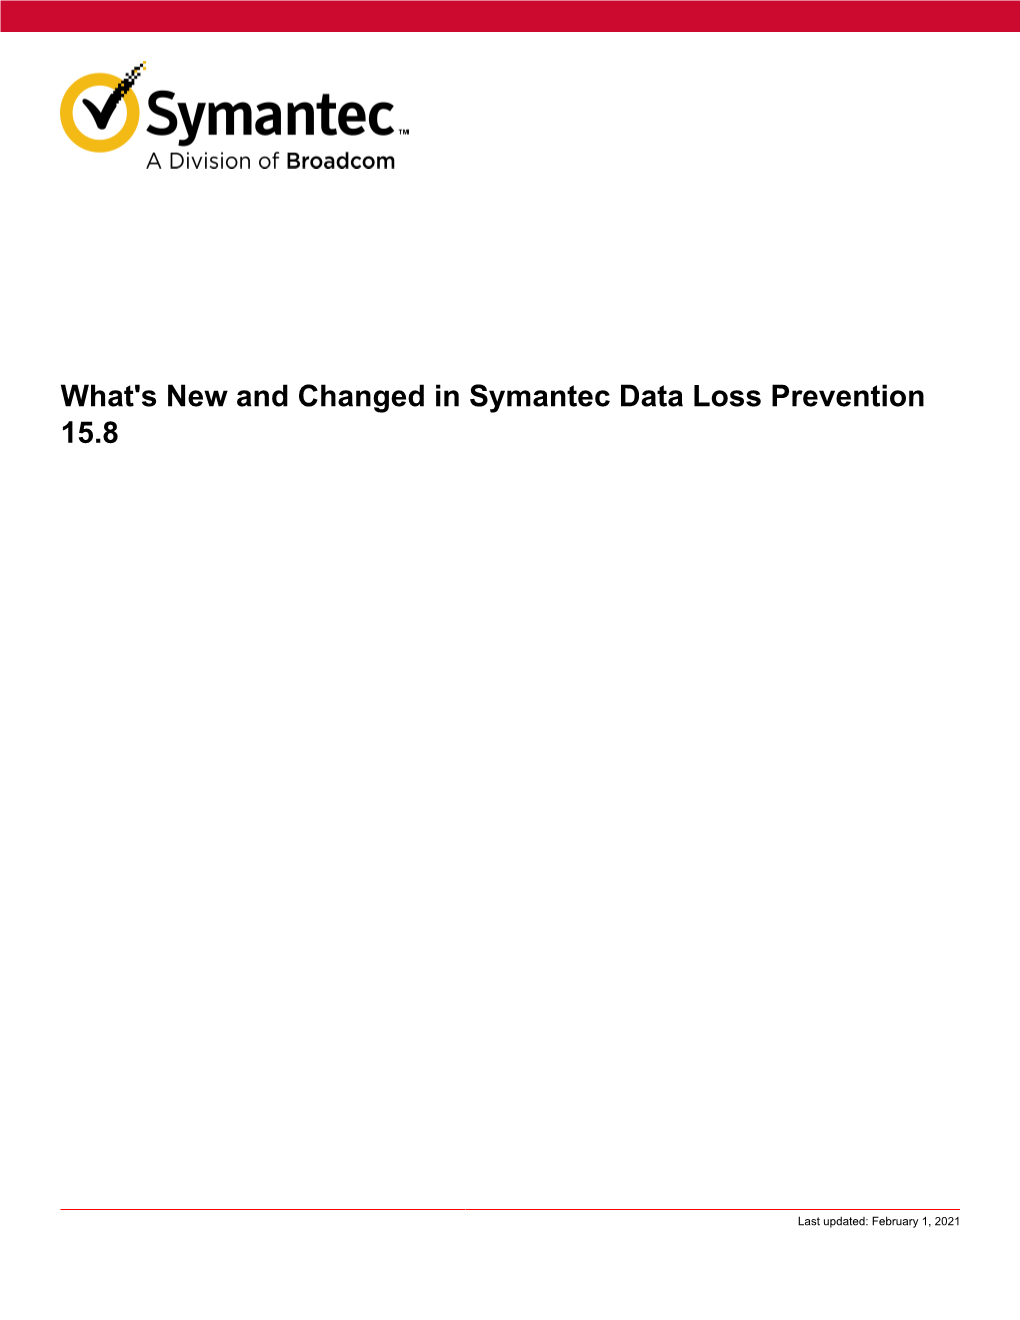 What's New and Changed in Symantec Data Loss Prevention 15.8